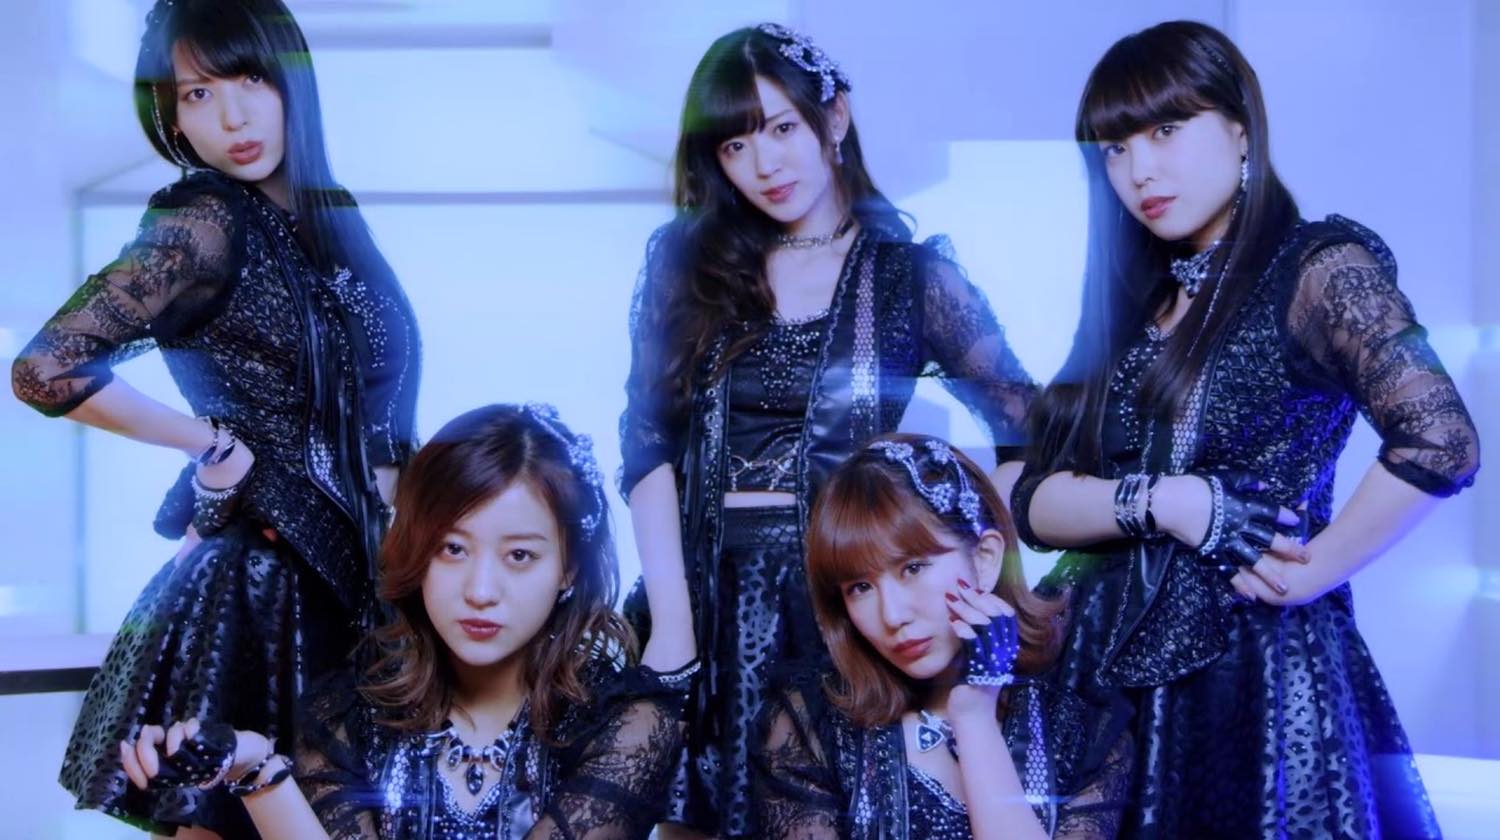 ℃-ute Prepare to Take Their Final Bows With the MV for “The Curtain Rises”!